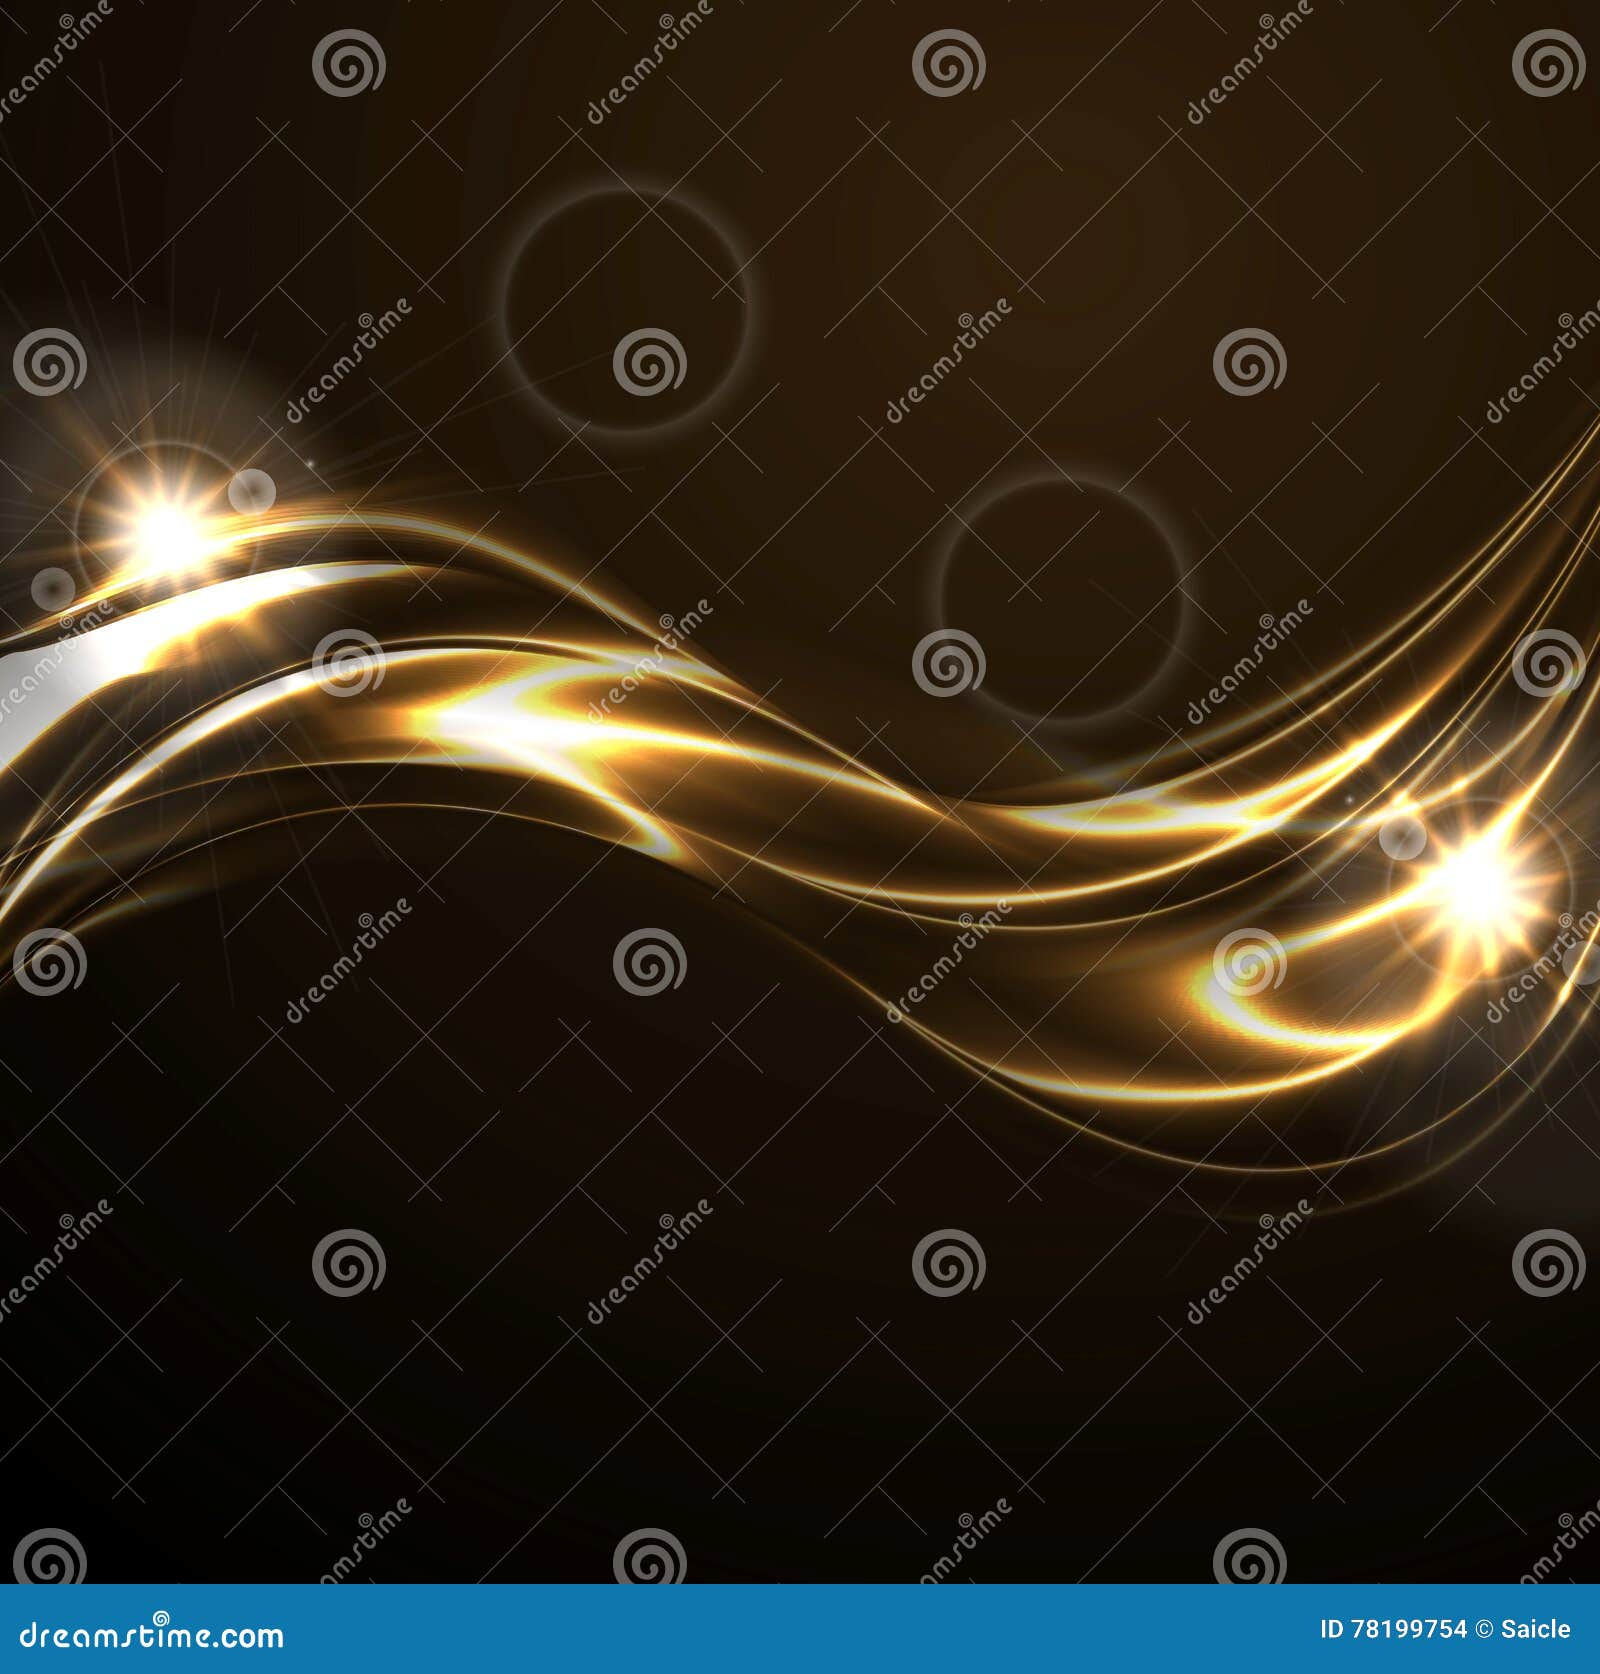 Golden Liquid Smooth Waves on Black Background Stock Vector ...